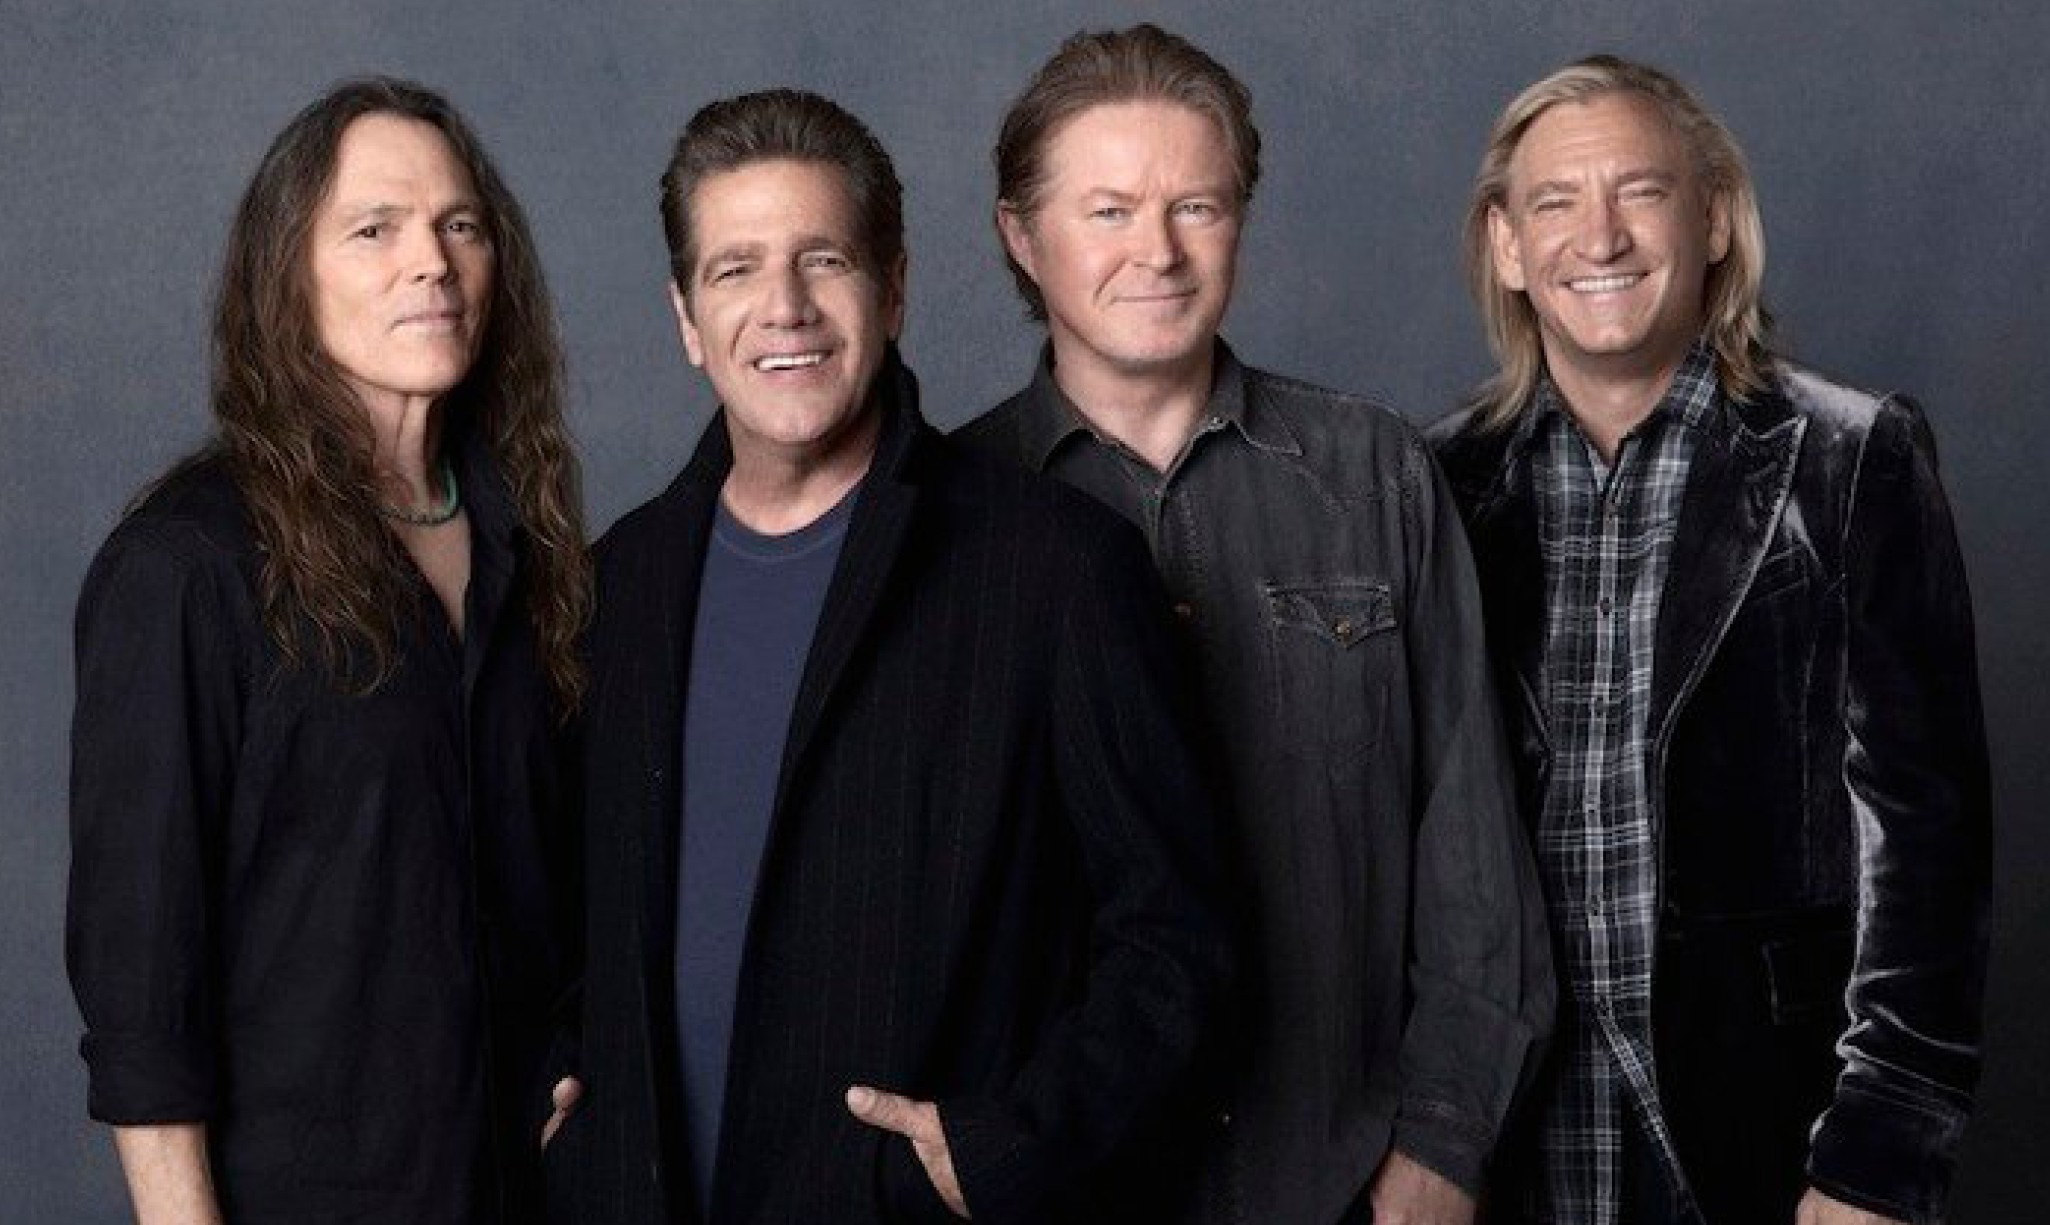 will the eagles tour in 2022